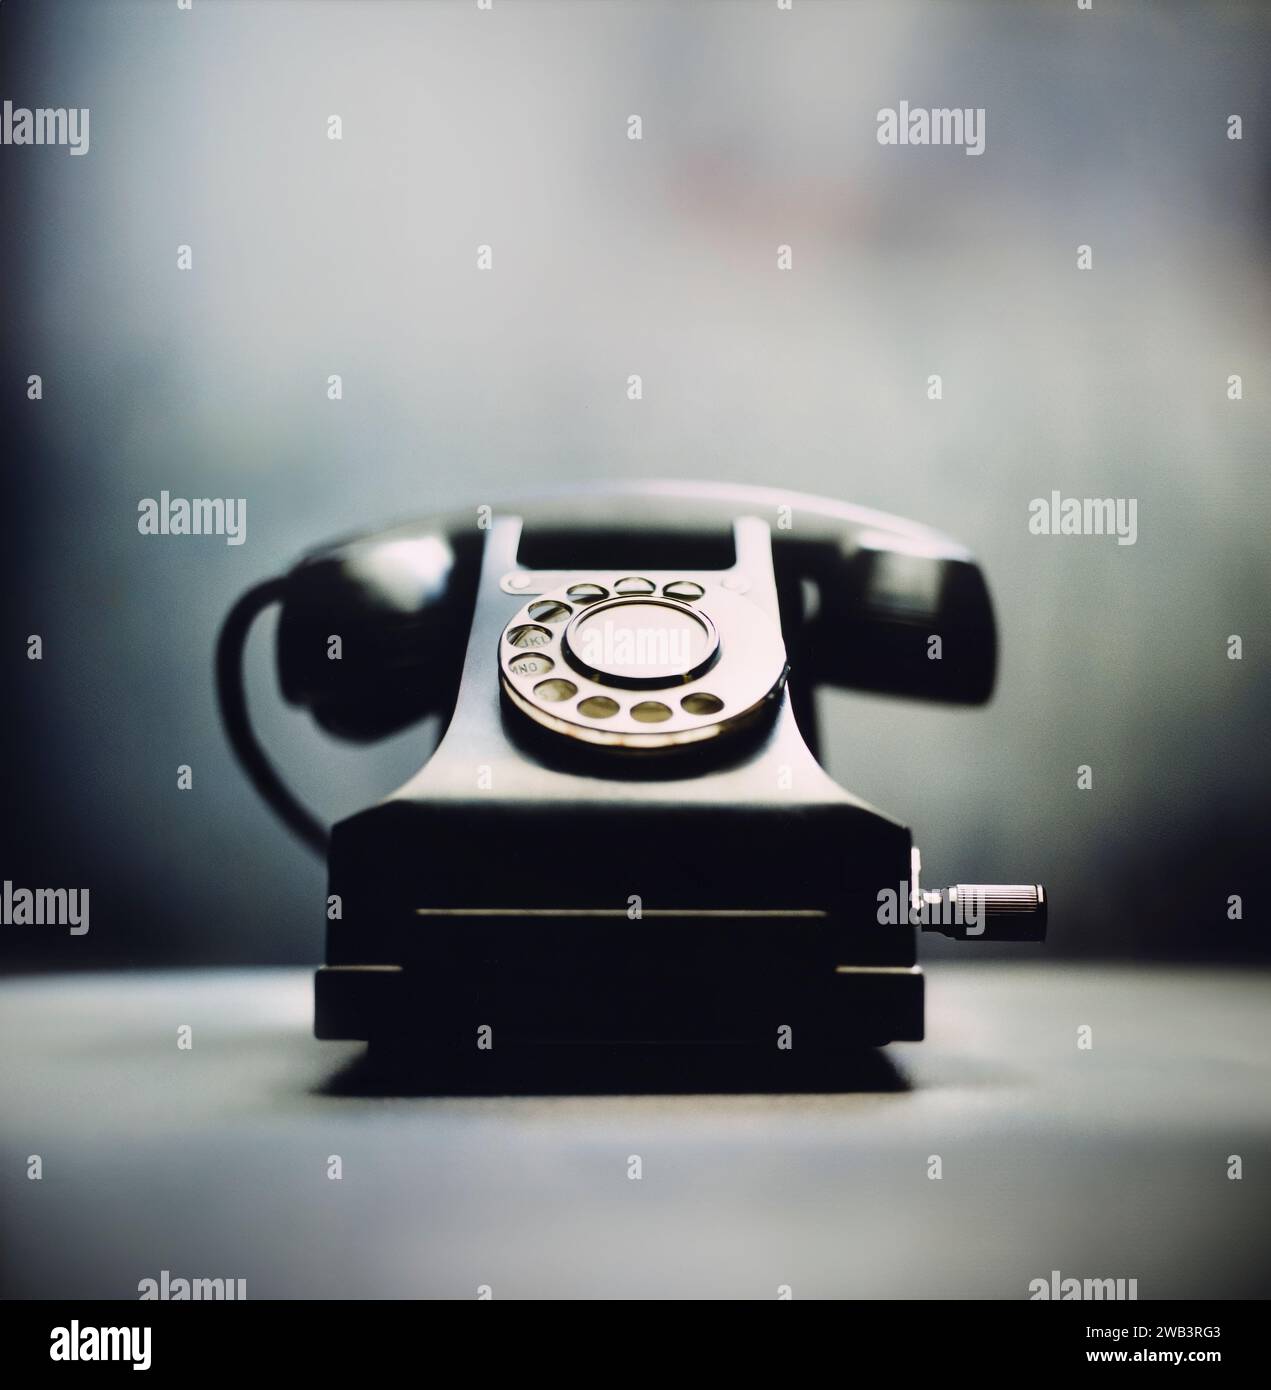 An antique telephone sits on a tabletop illuminated by natural light Stock Photo